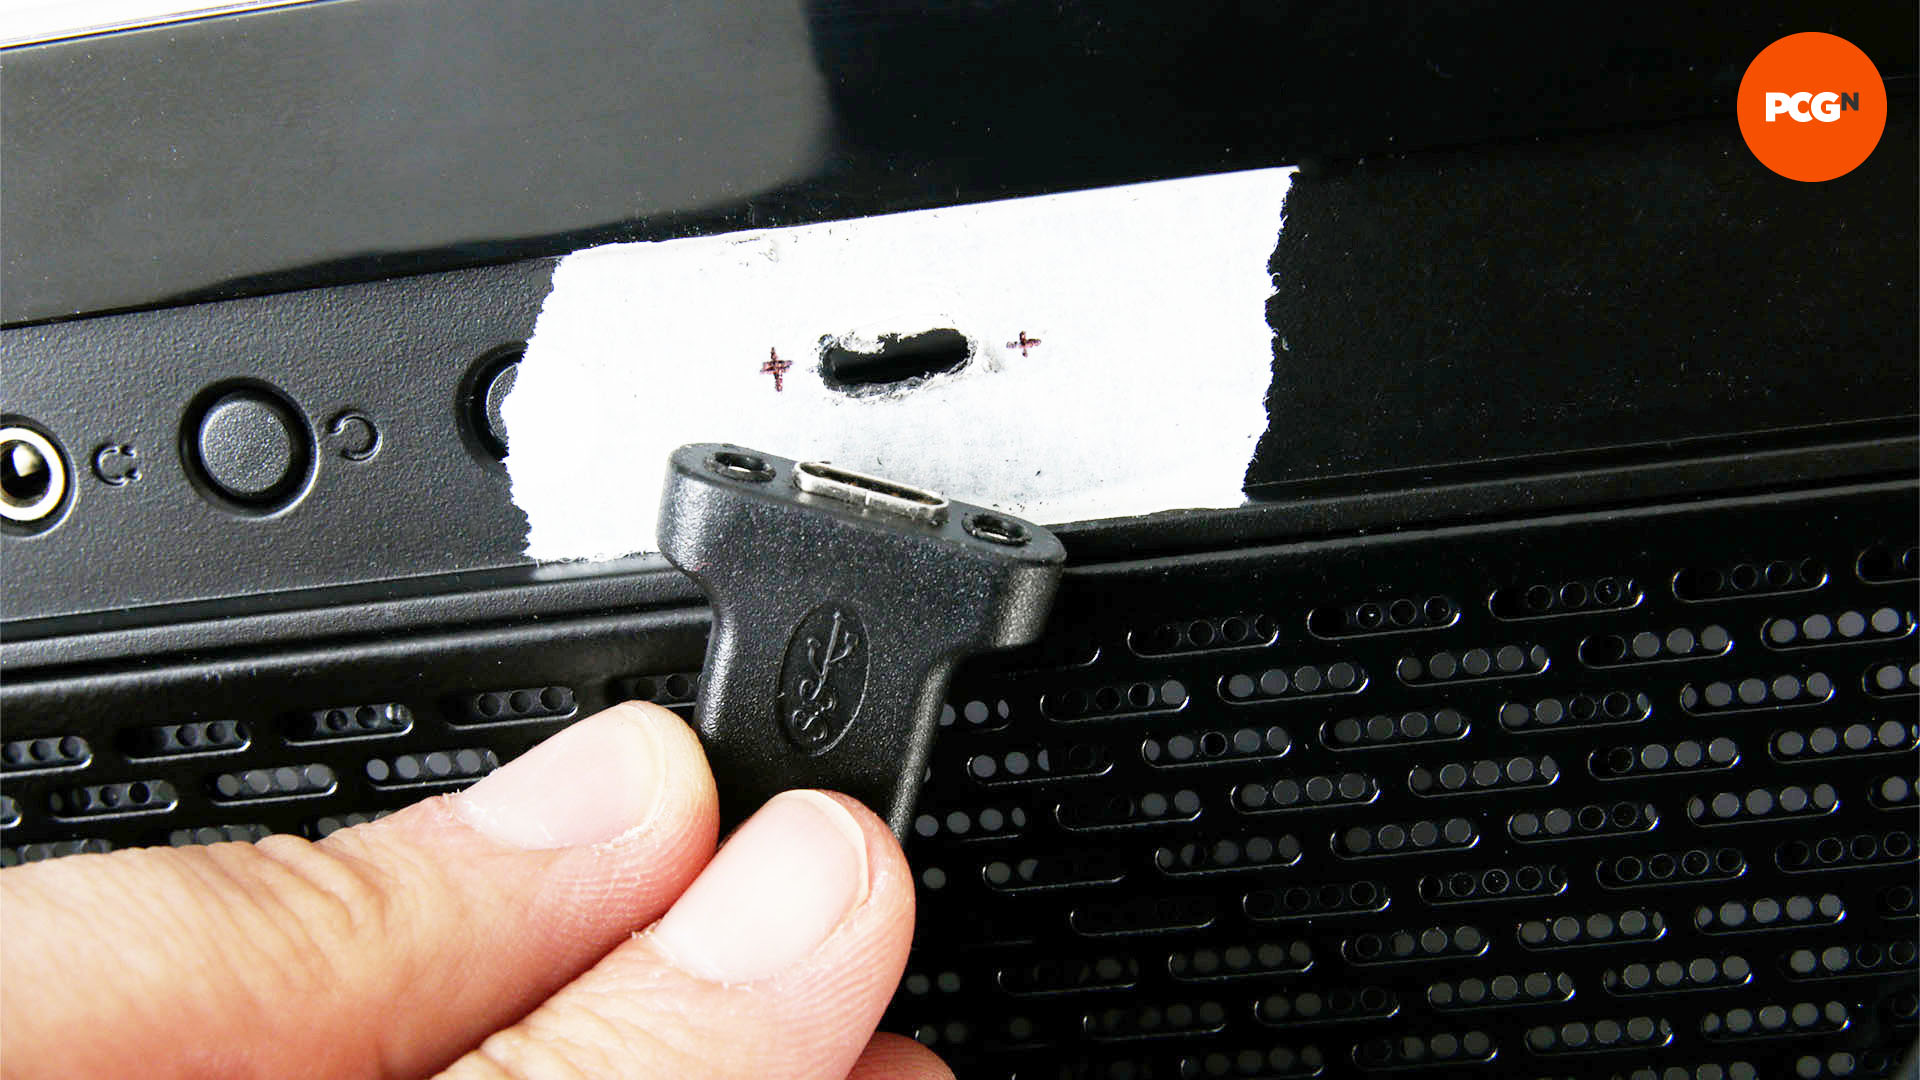 How to add USB-C to your PC case: Mark up mounting holes